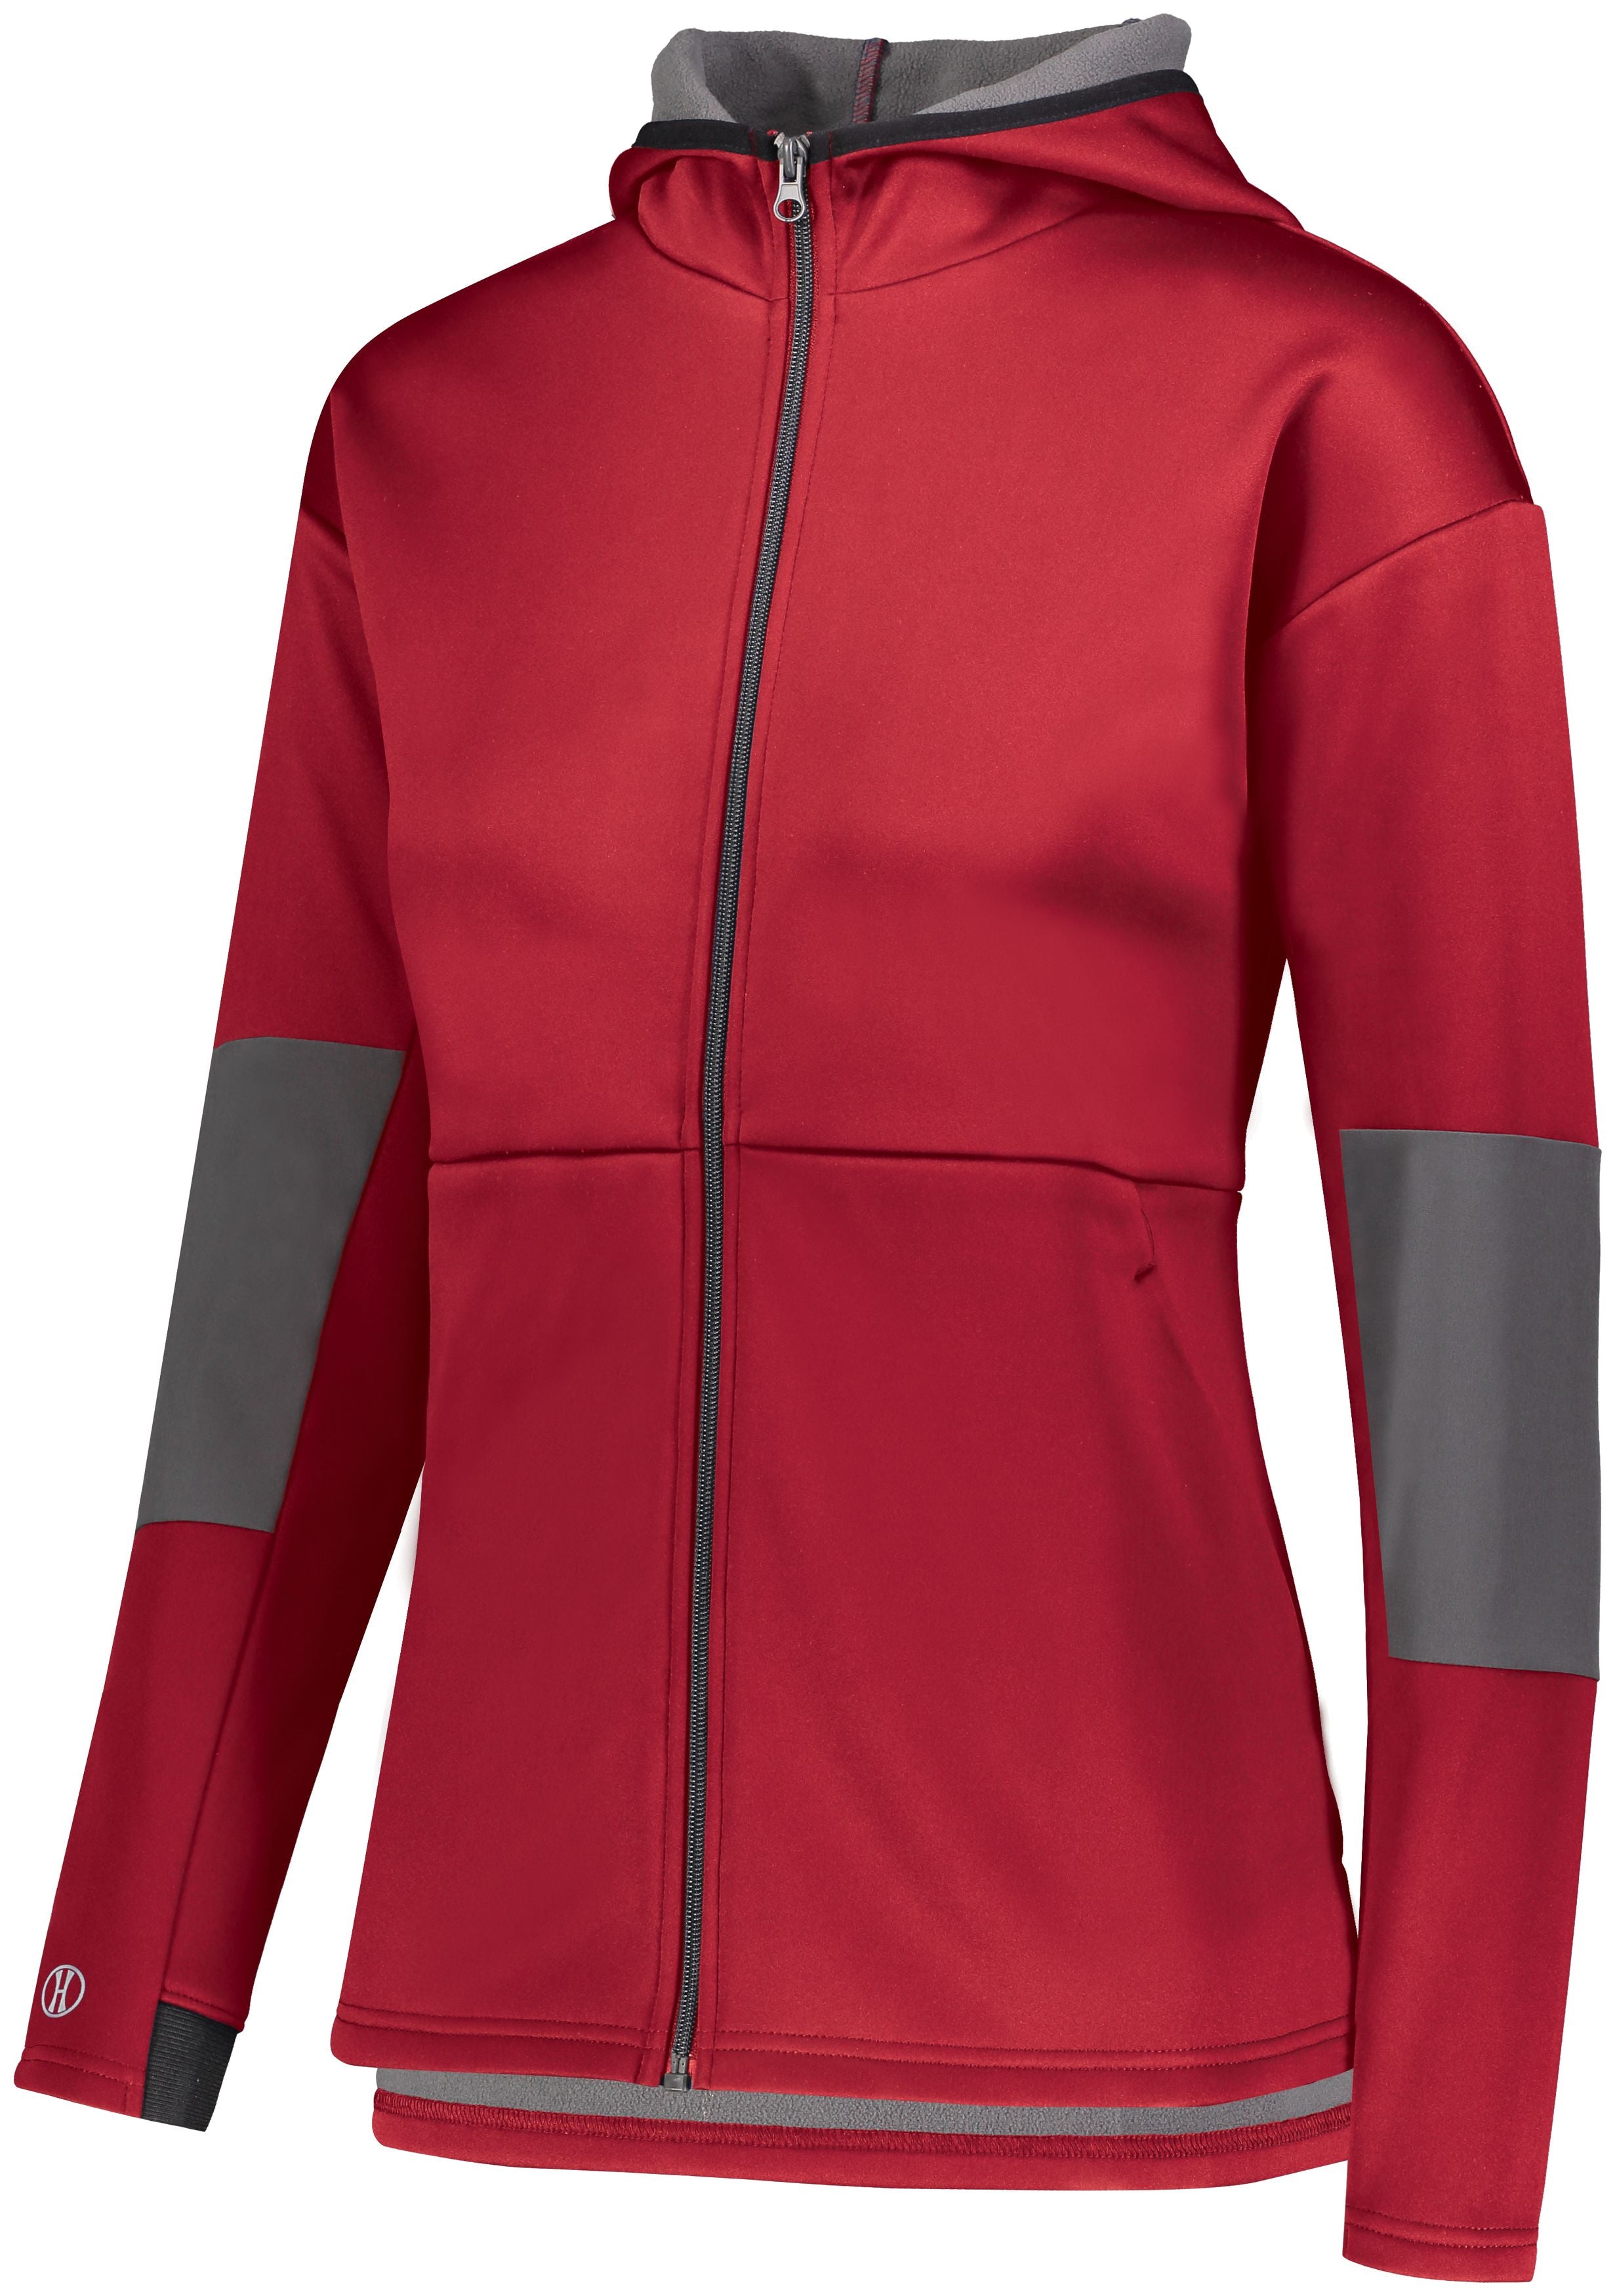 Holloway Ladies Sof-Stretch Jacket in Scarlet/Carbon  -Part of the Ladies, Ladies-Jacket, Holloway, Outerwear product lines at KanaleyCreations.com